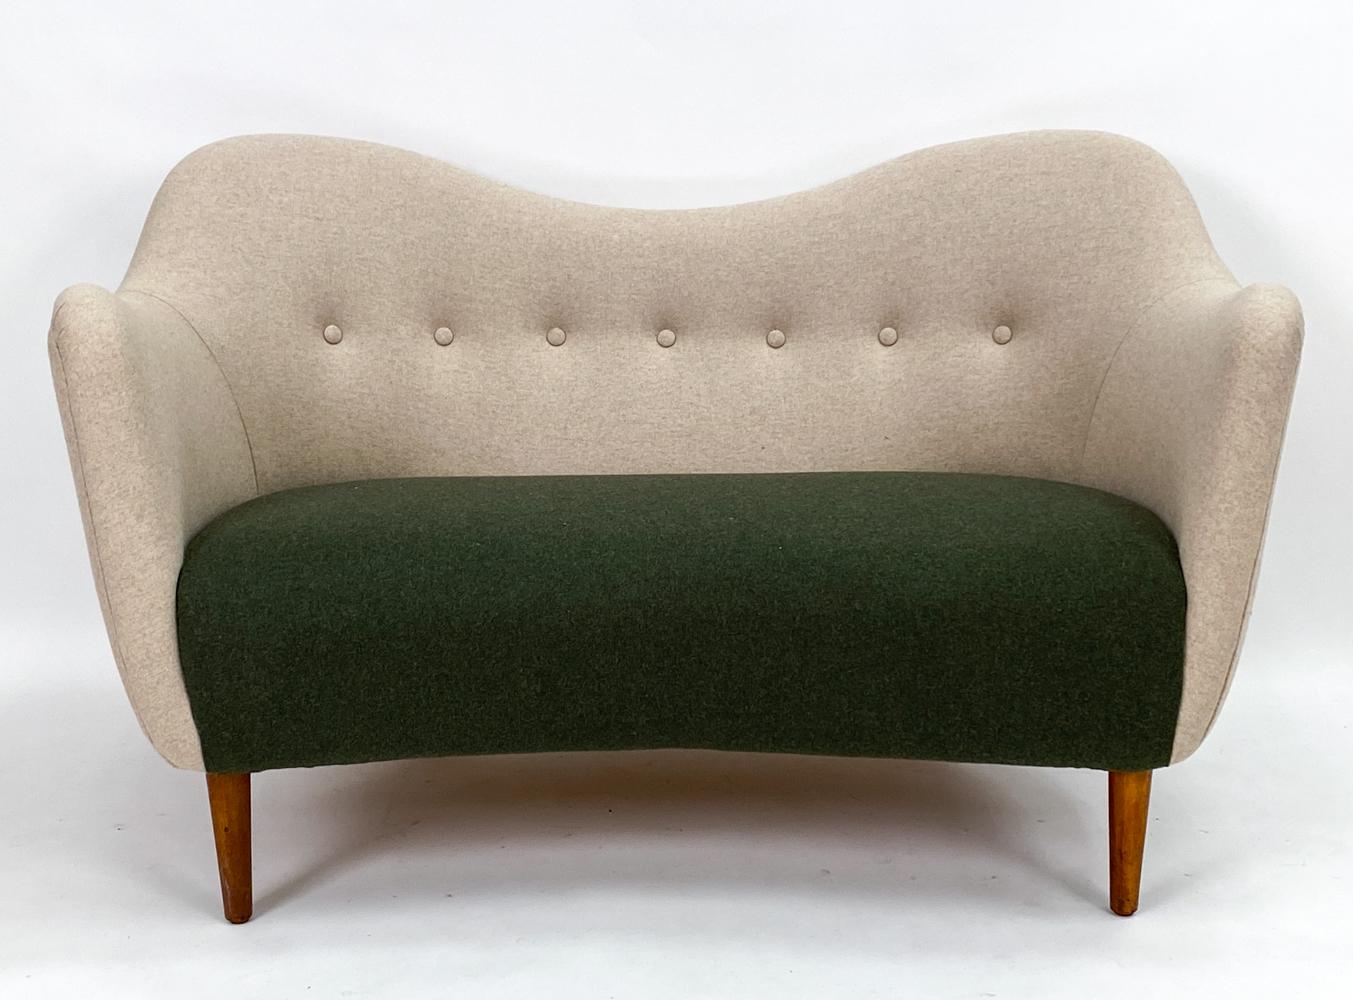 An iconic Danish mid-century sofa from Finn Juhl, one of the early leaders of the Scandinavian modern design movement, this model BO 46 petite proportioned sofa or loveseat was manufactured by Bovirke, c. 1940's. Sculptural, curvilinear lines lend